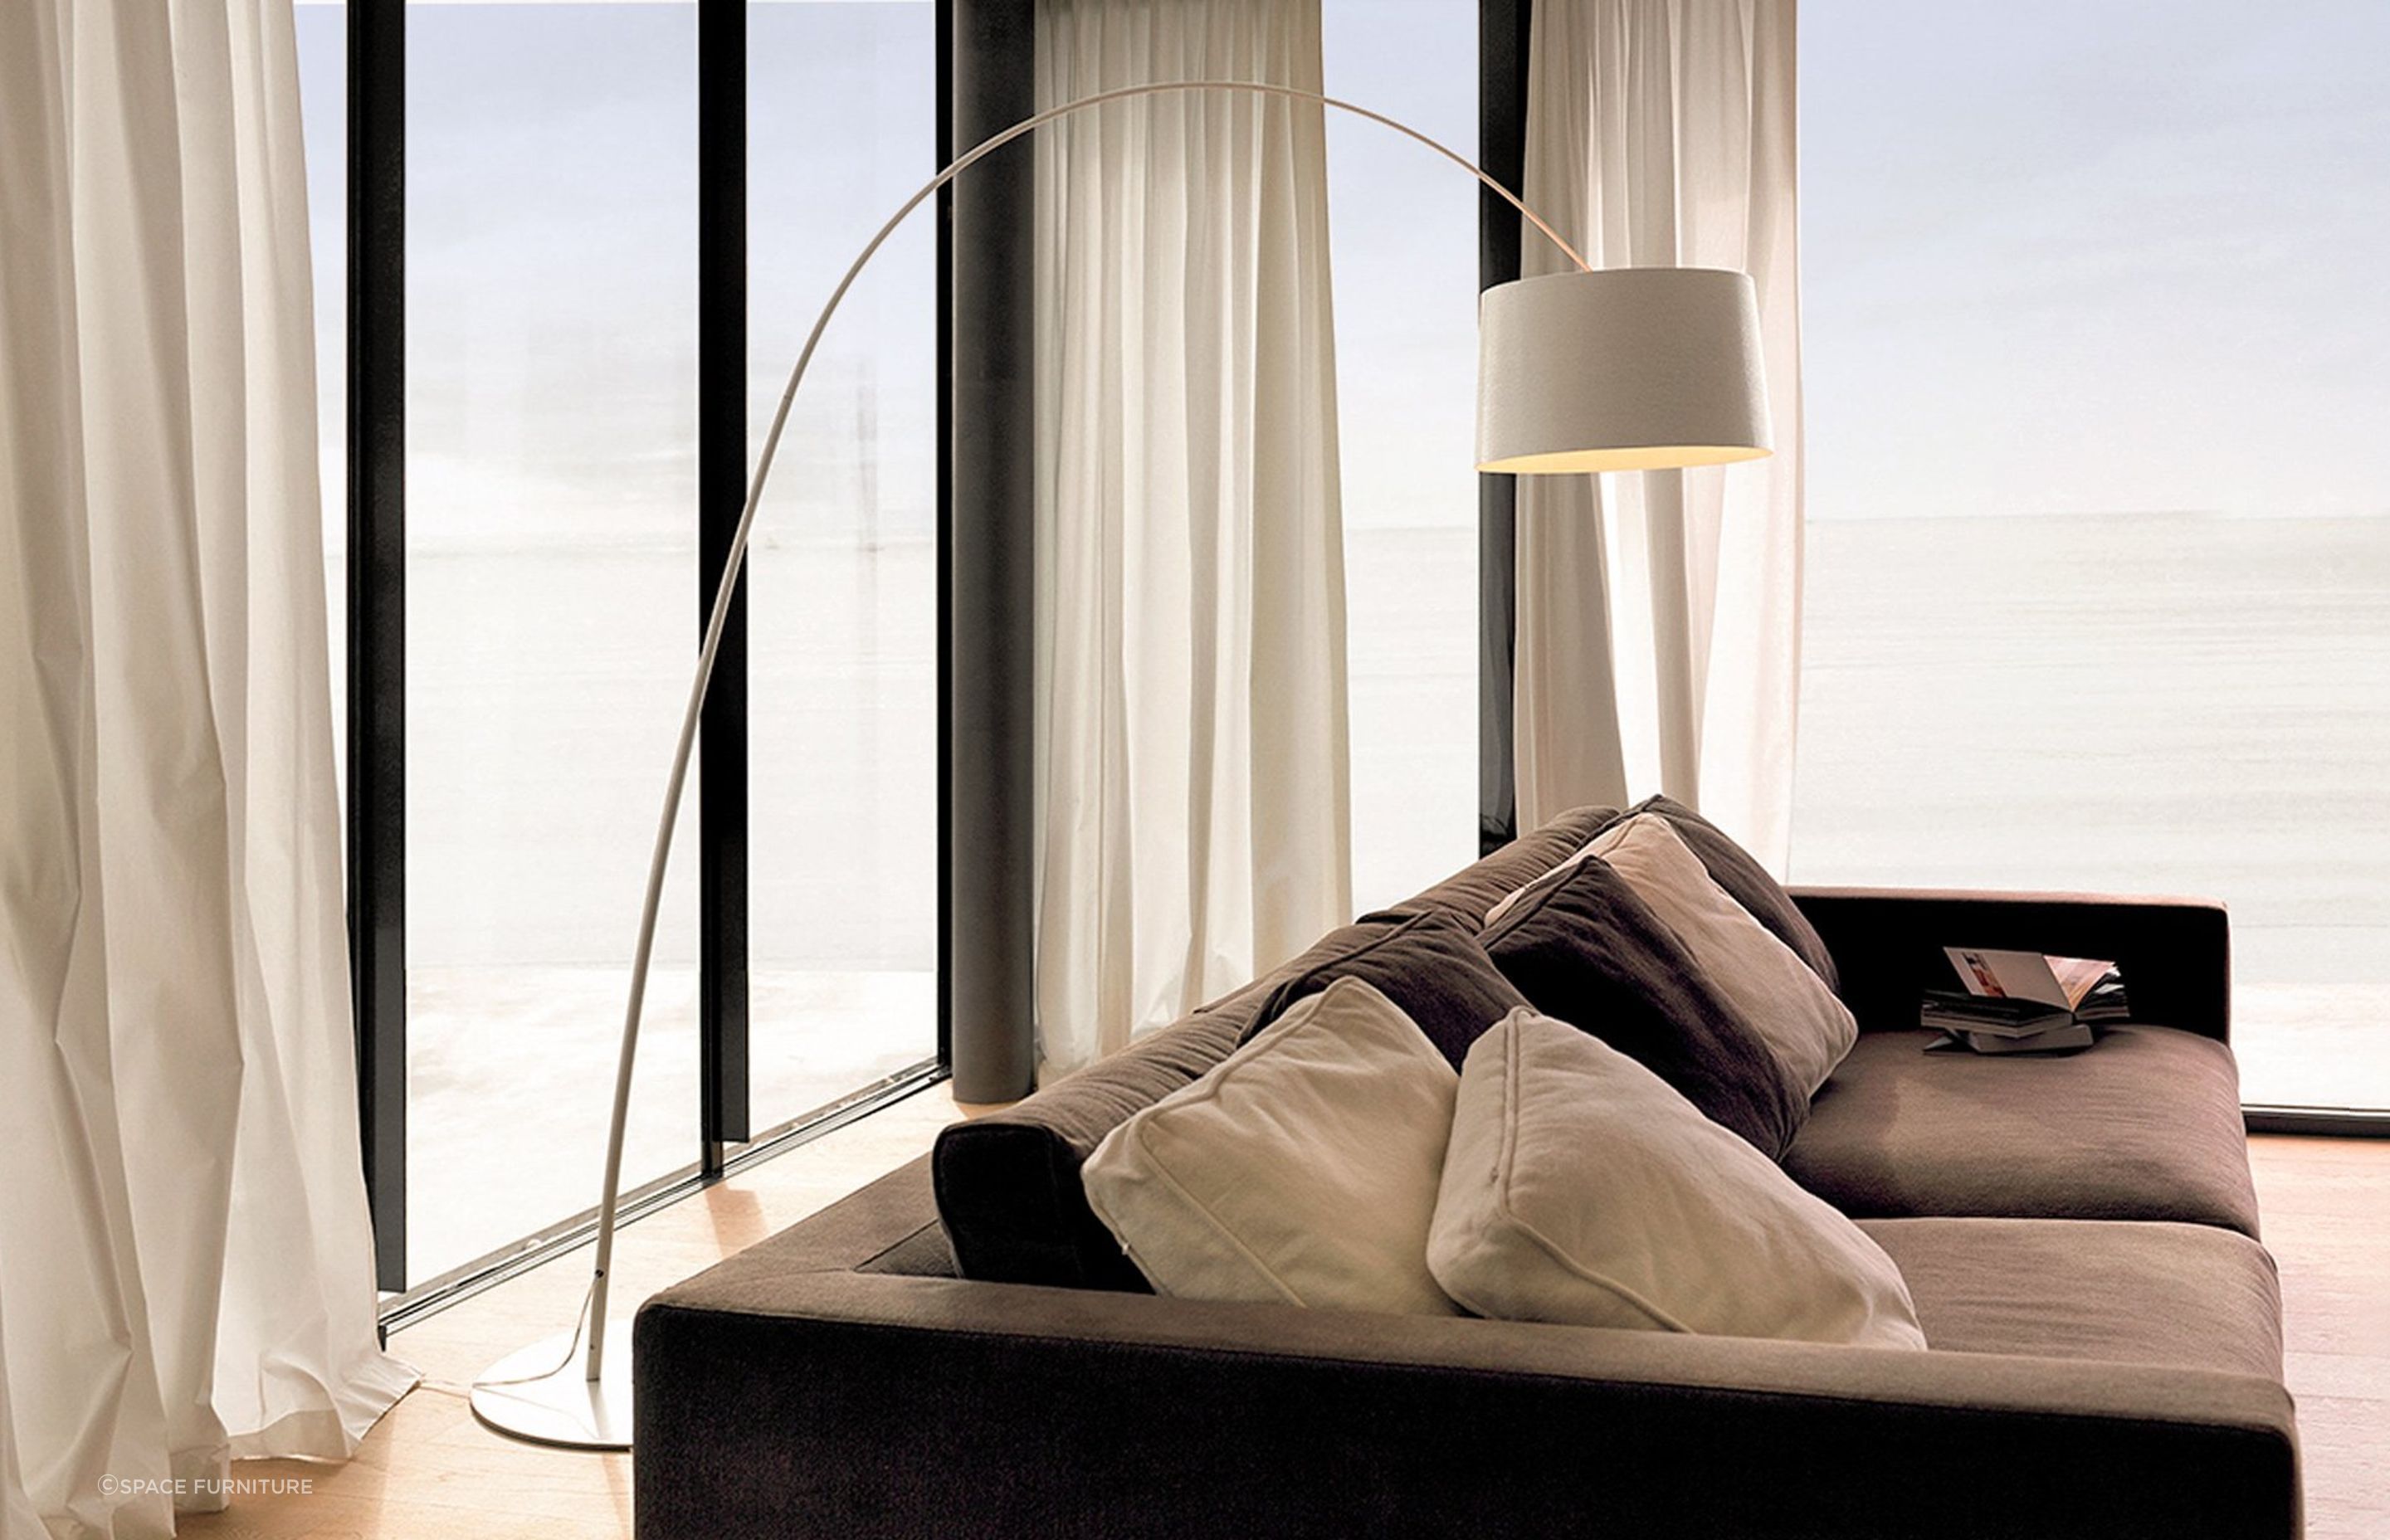 The flexible extension rod of the Twiggy Curved Floor Lamp allows for plenty of flexibility in terms of lamp placement.